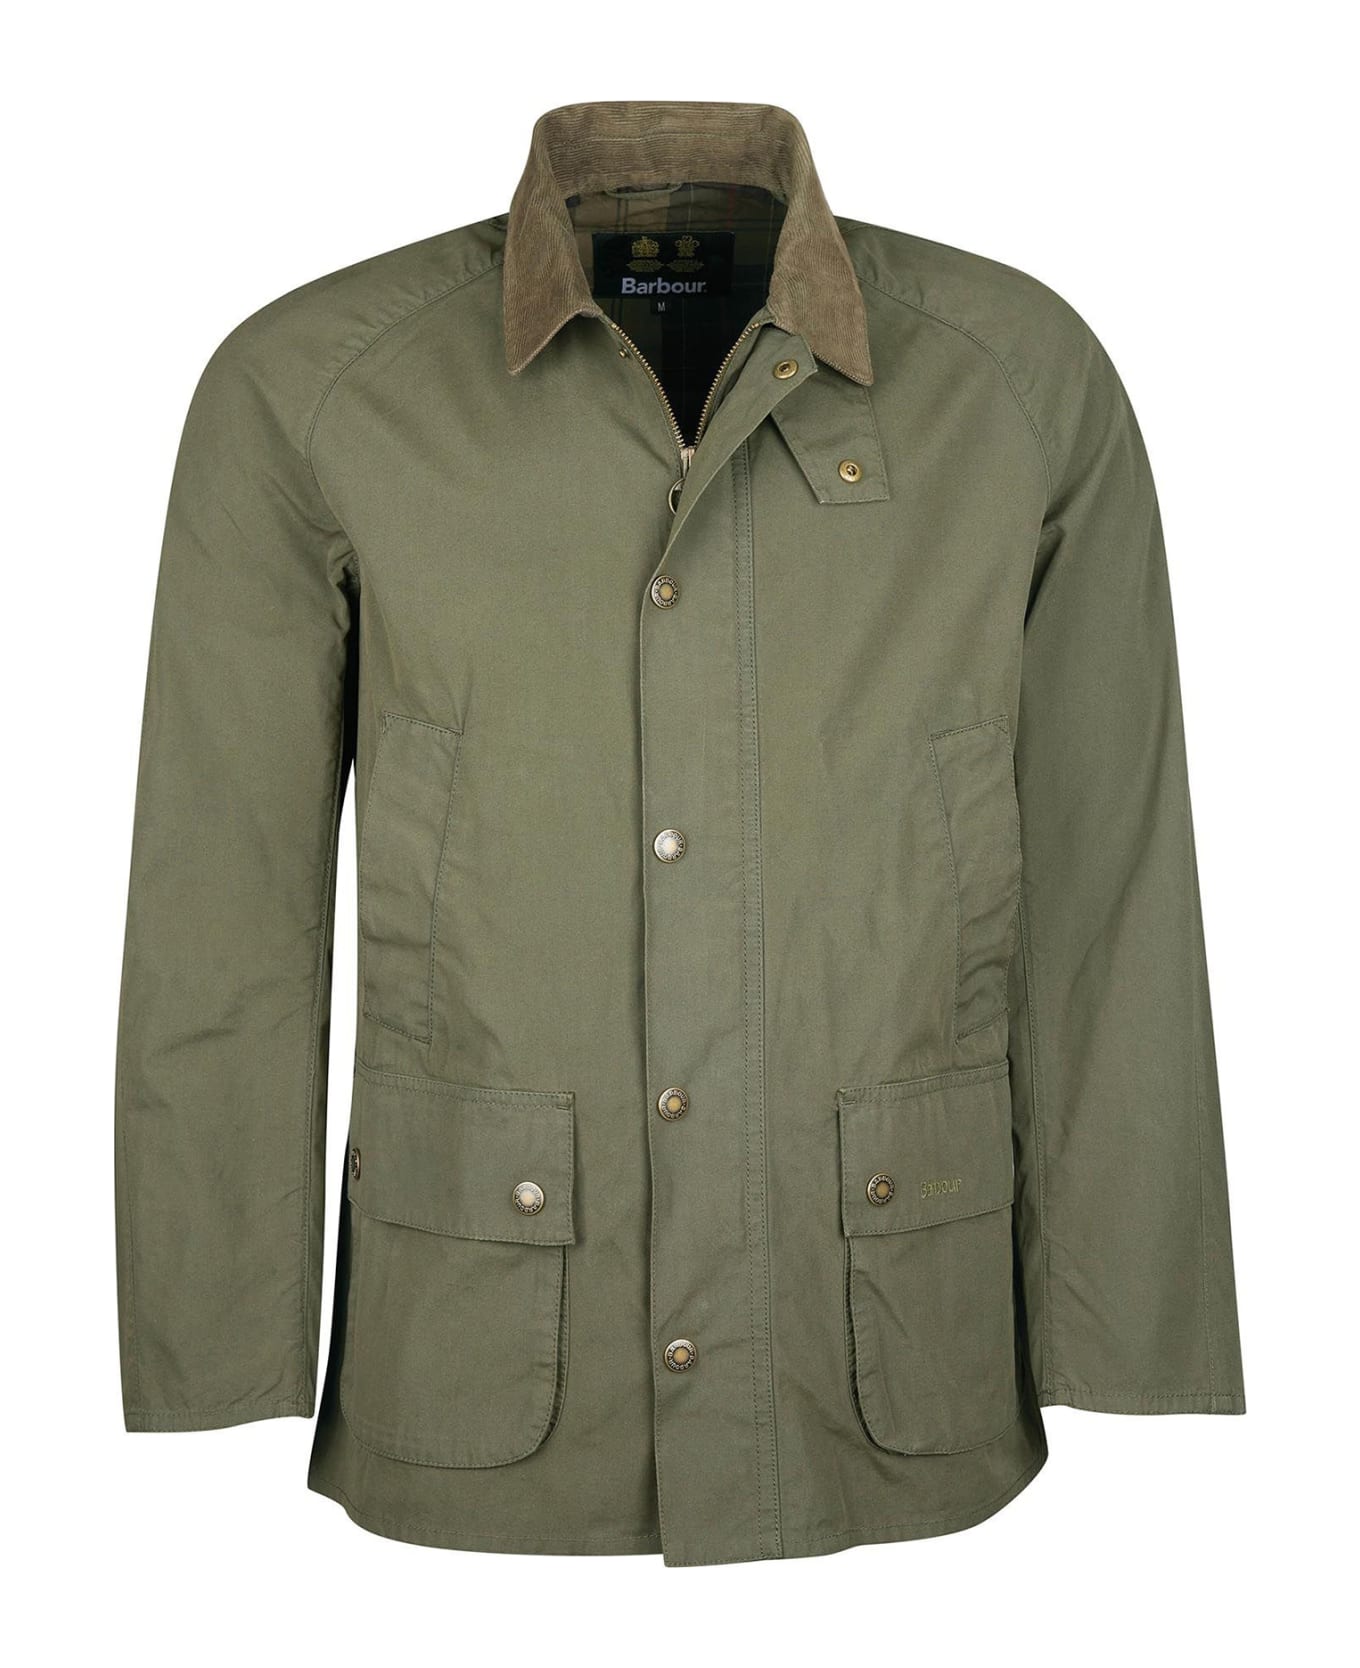 Barbour Olive Green Jacket With Buttons - OLIVE ジャケット